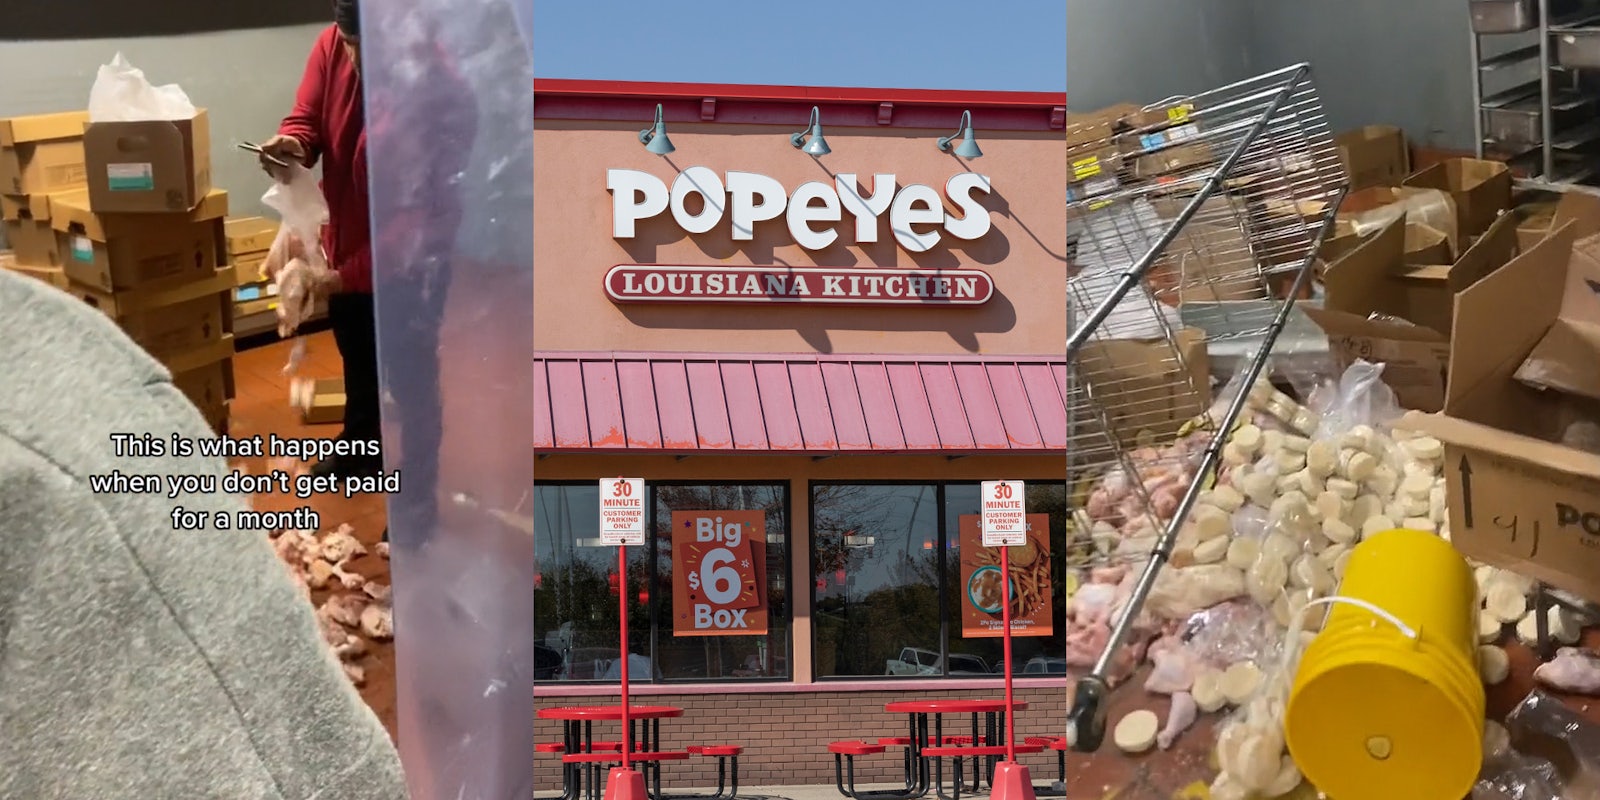 Popeyes worker trashing restaurant with caption 'This is what happens when you don't get paid for a month' (l) Popeyes restaurant with sign (c) Popeyes interior trashed with shelves tipped over, buns on the ground, and boxes thrown everywhere (r)